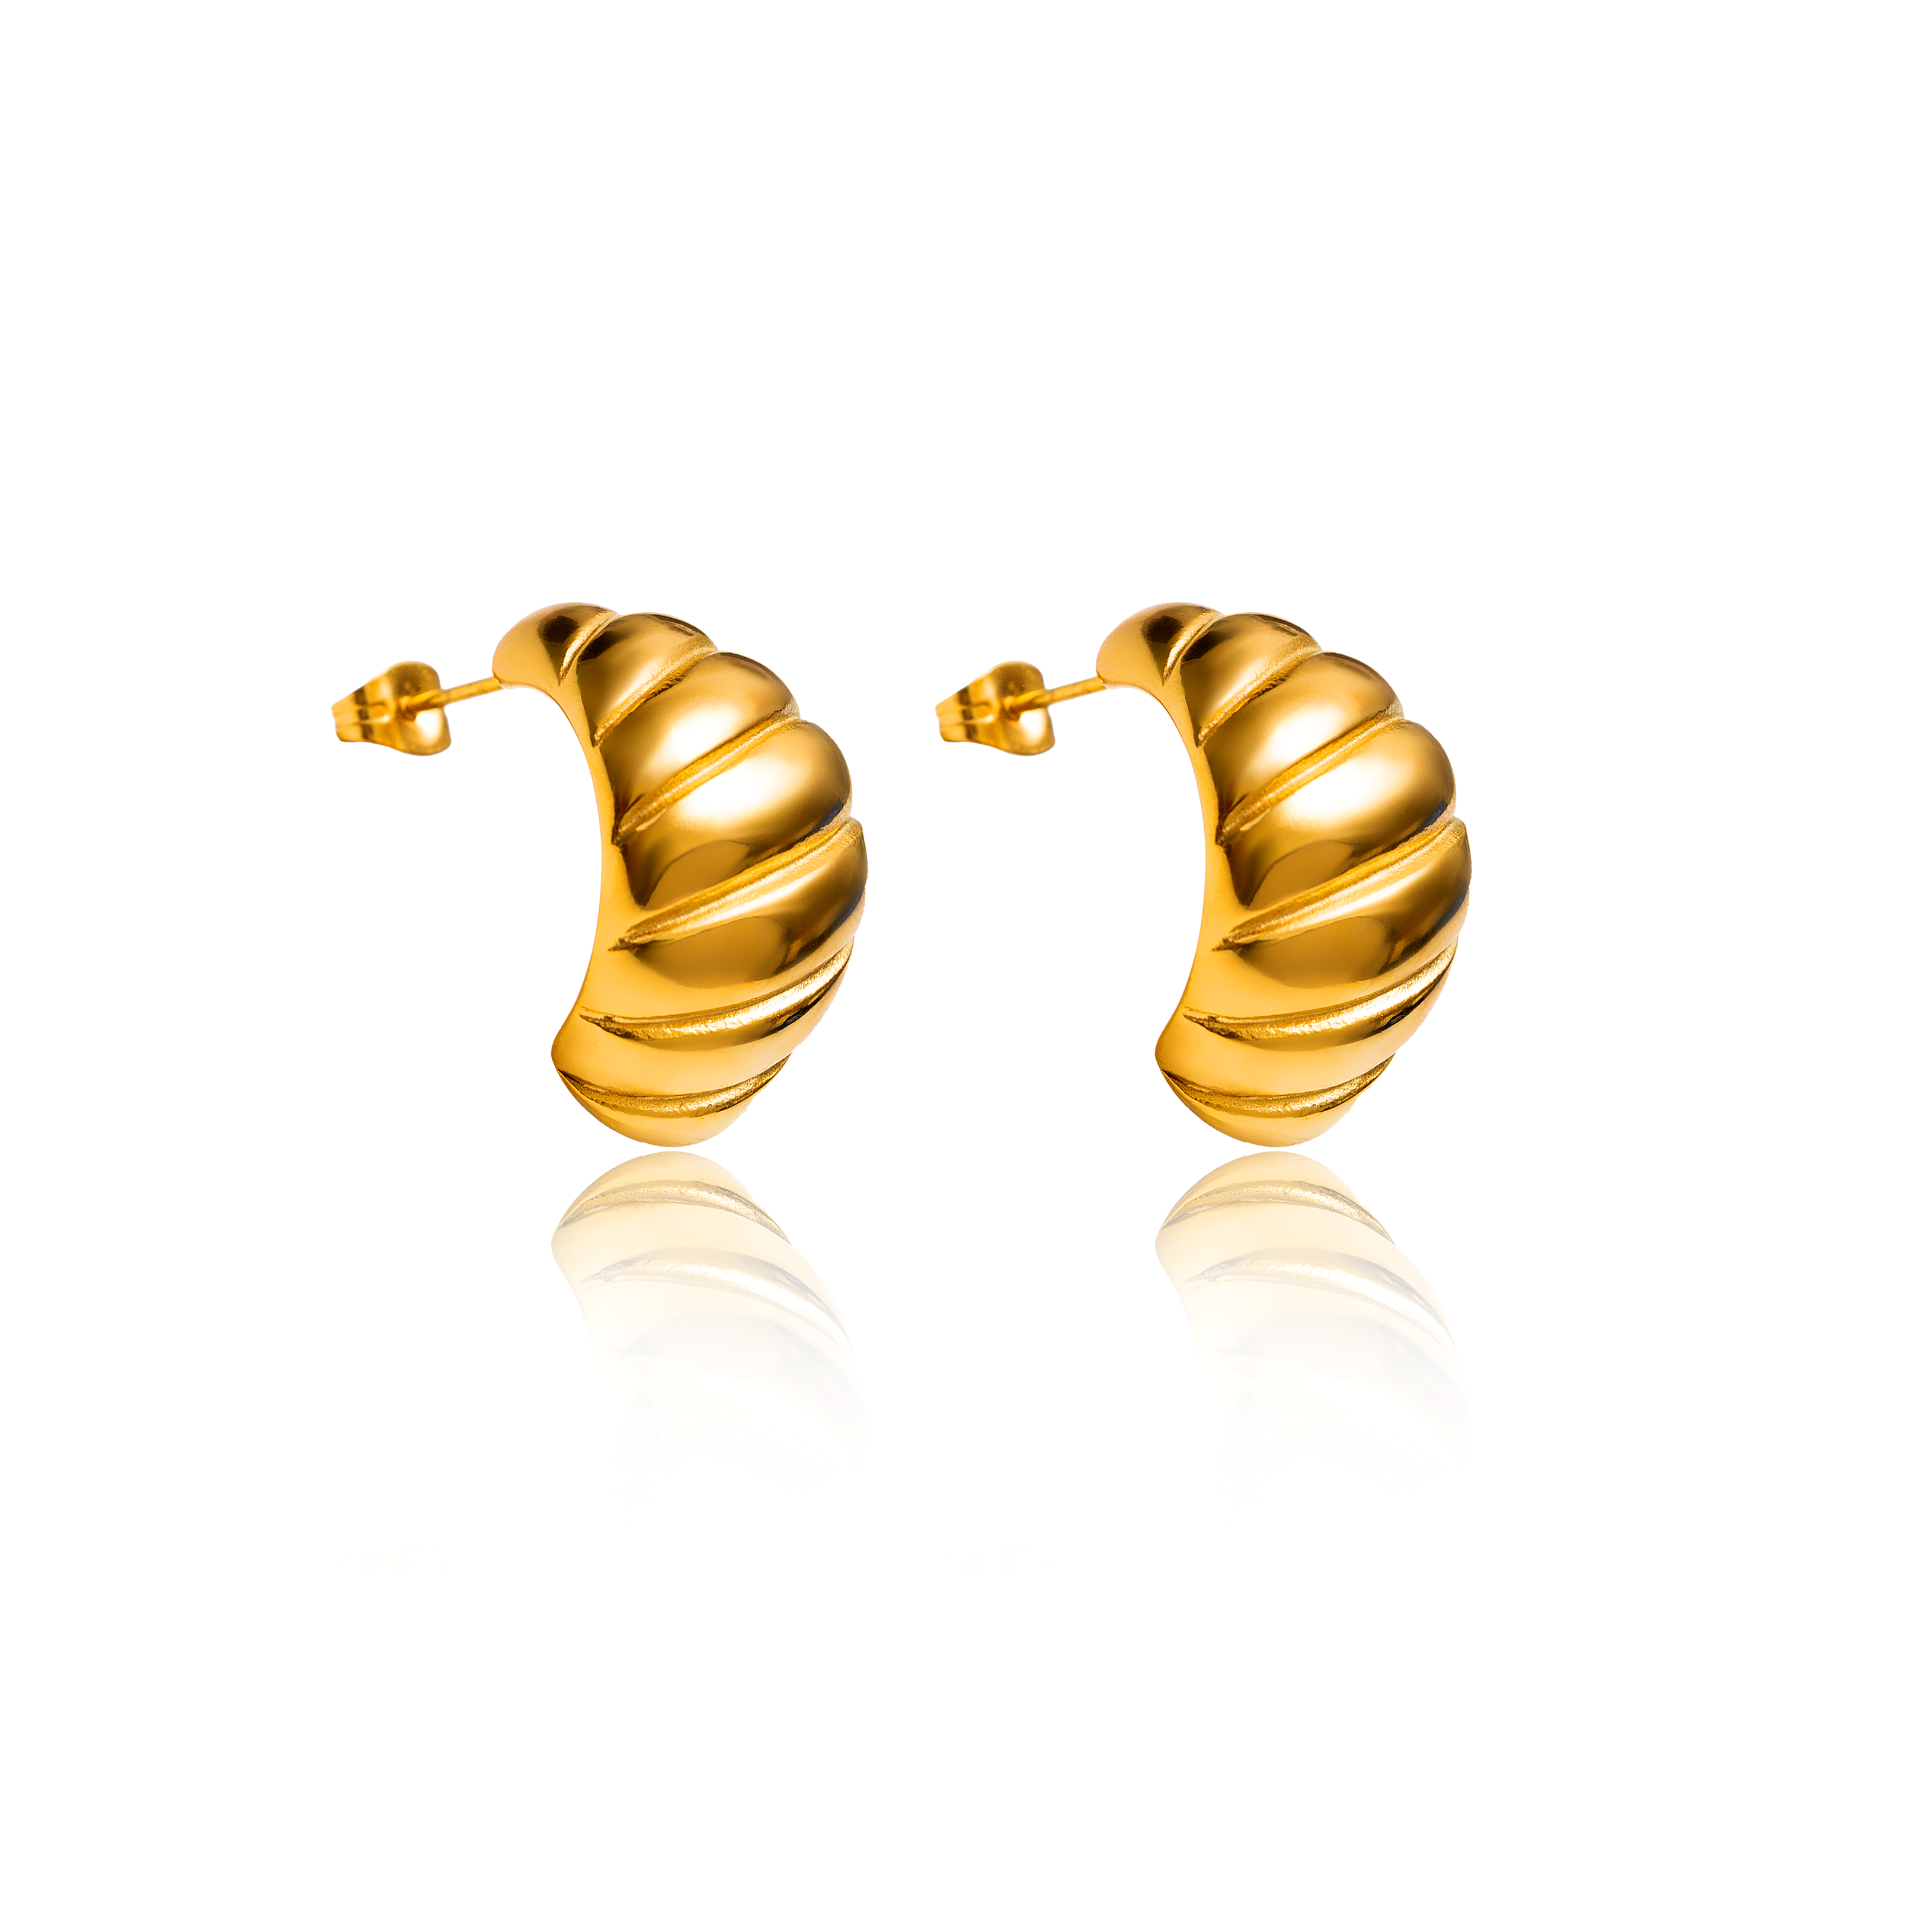 Your outfit is not complete without these chunky gold hoops. The bold design and gold finish will create an eye-catching look and step up your style game.  18k gold plated on stainless steel. Outer diameter: 25mm Width: 17mm